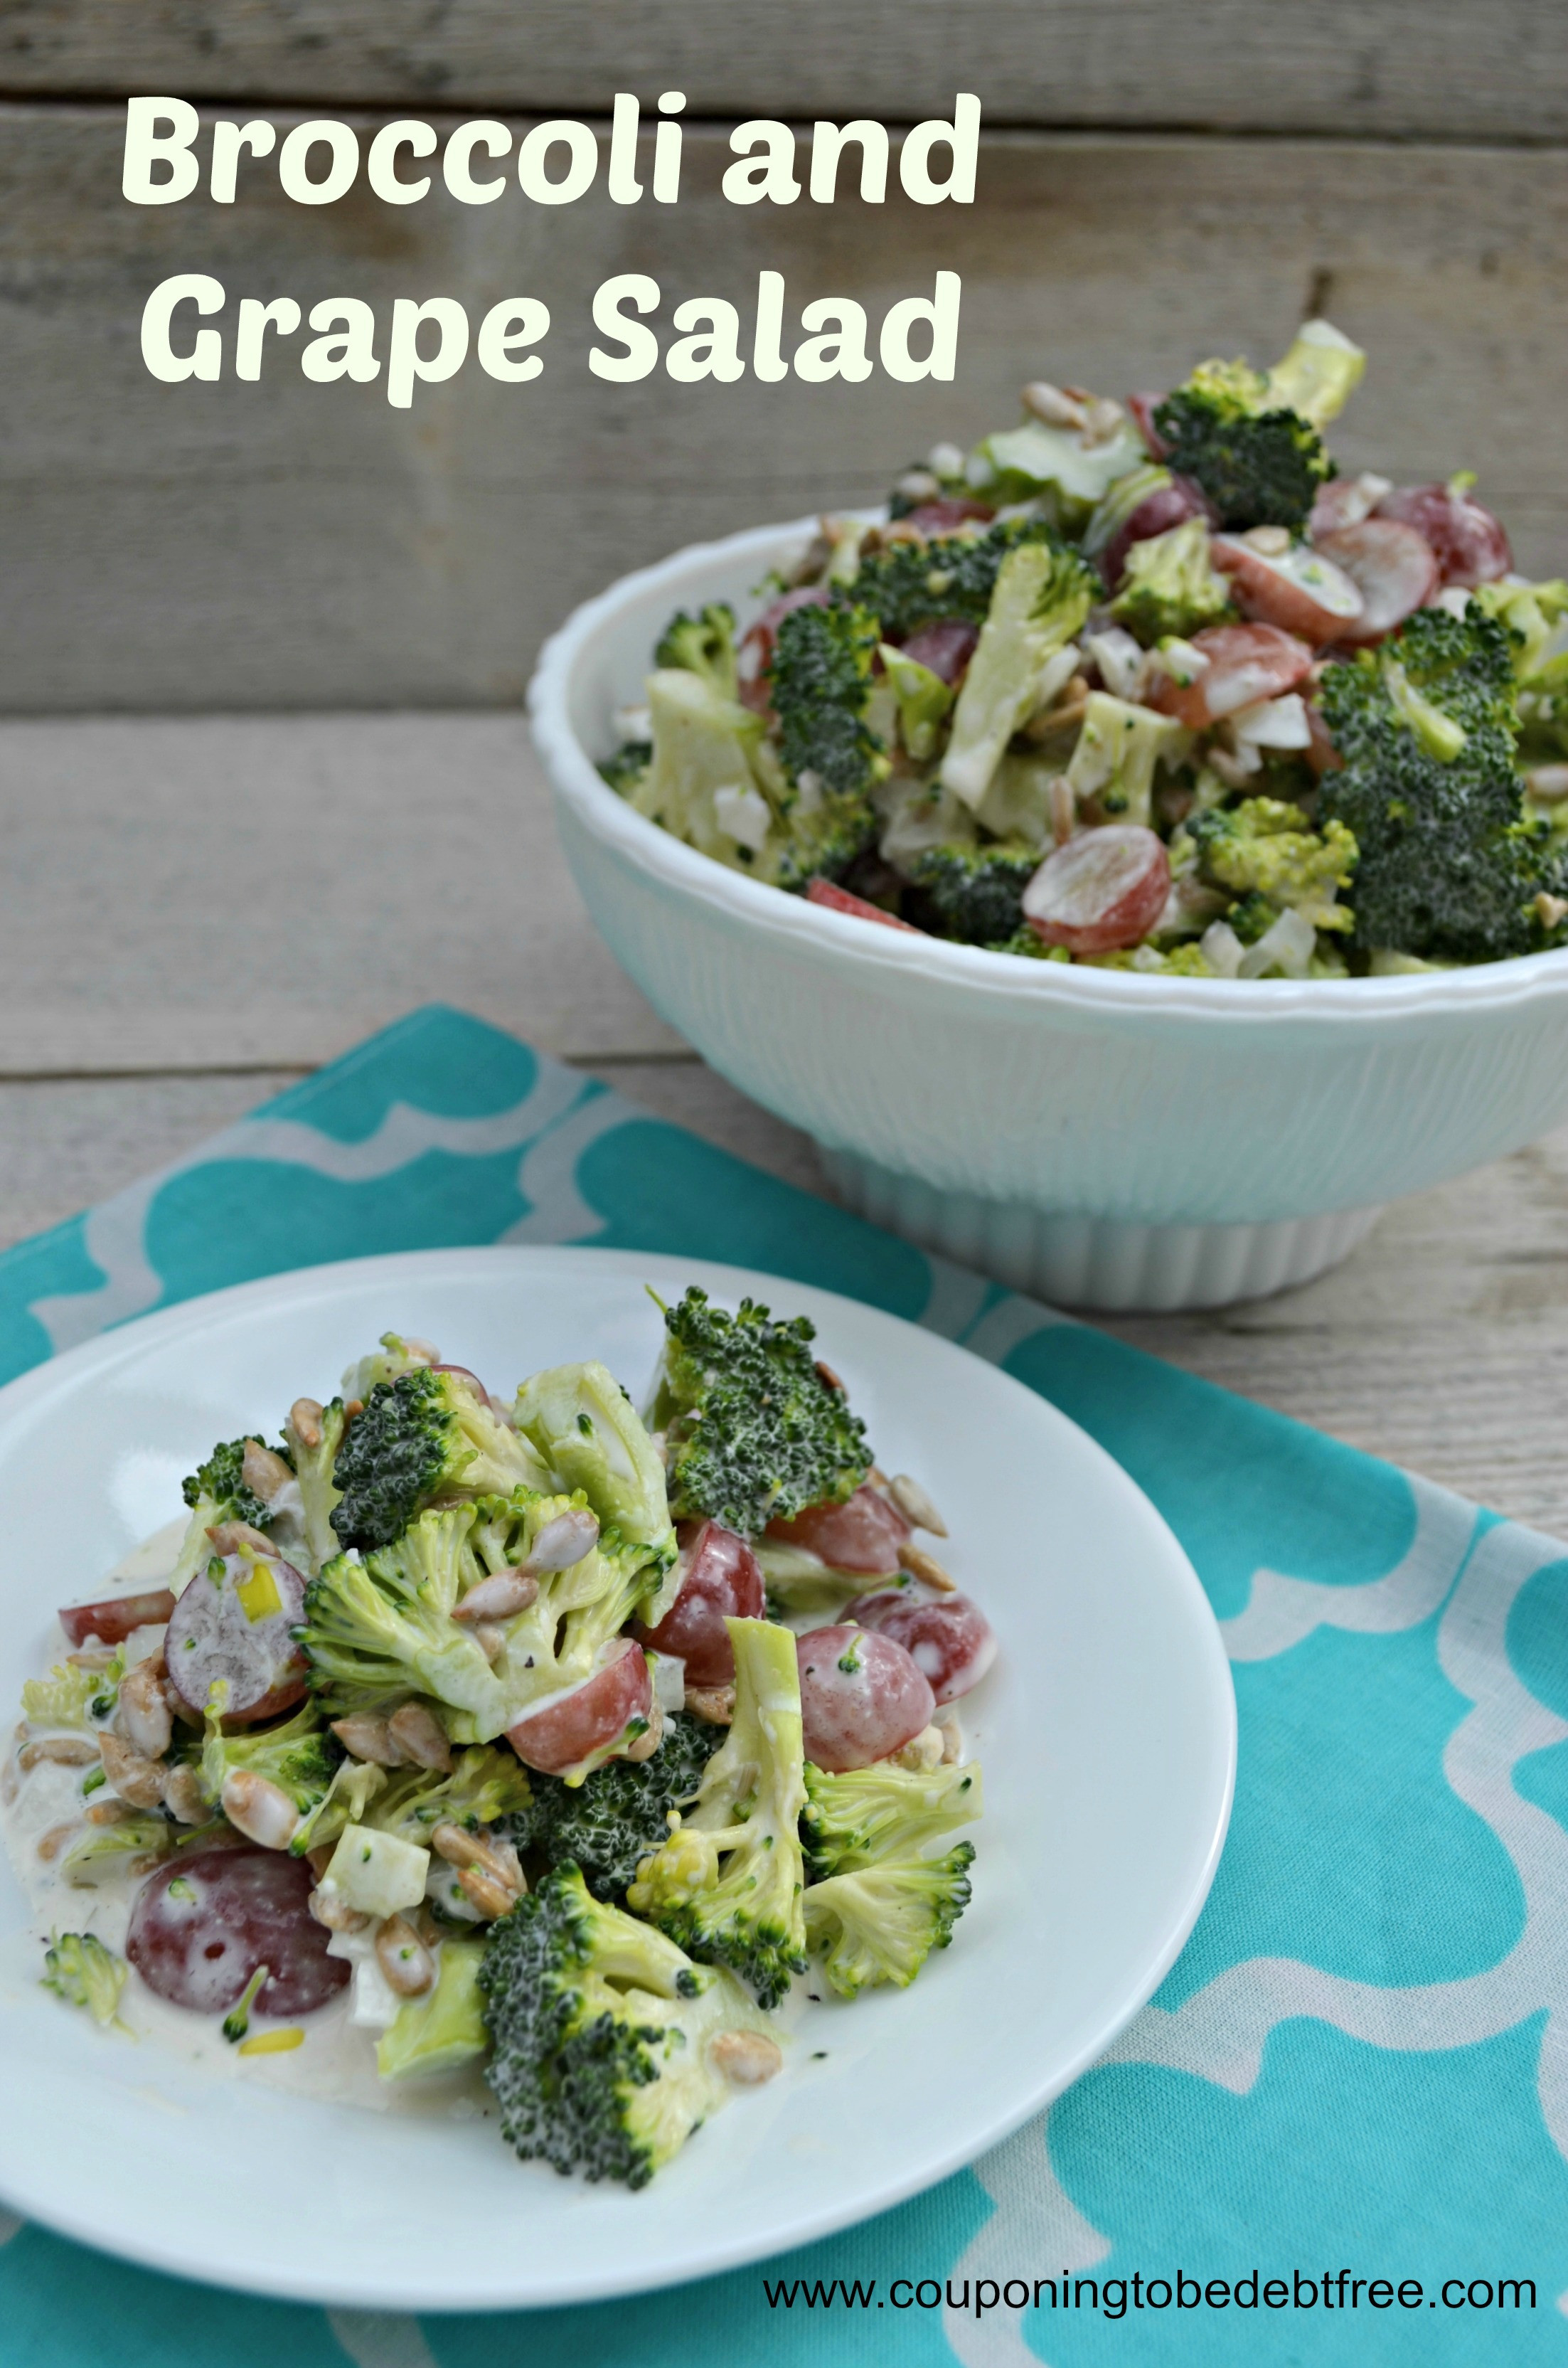 Broccoli Salad With Grapes
 Broccoli and Grape Salad Recipe Delicious and Frugal